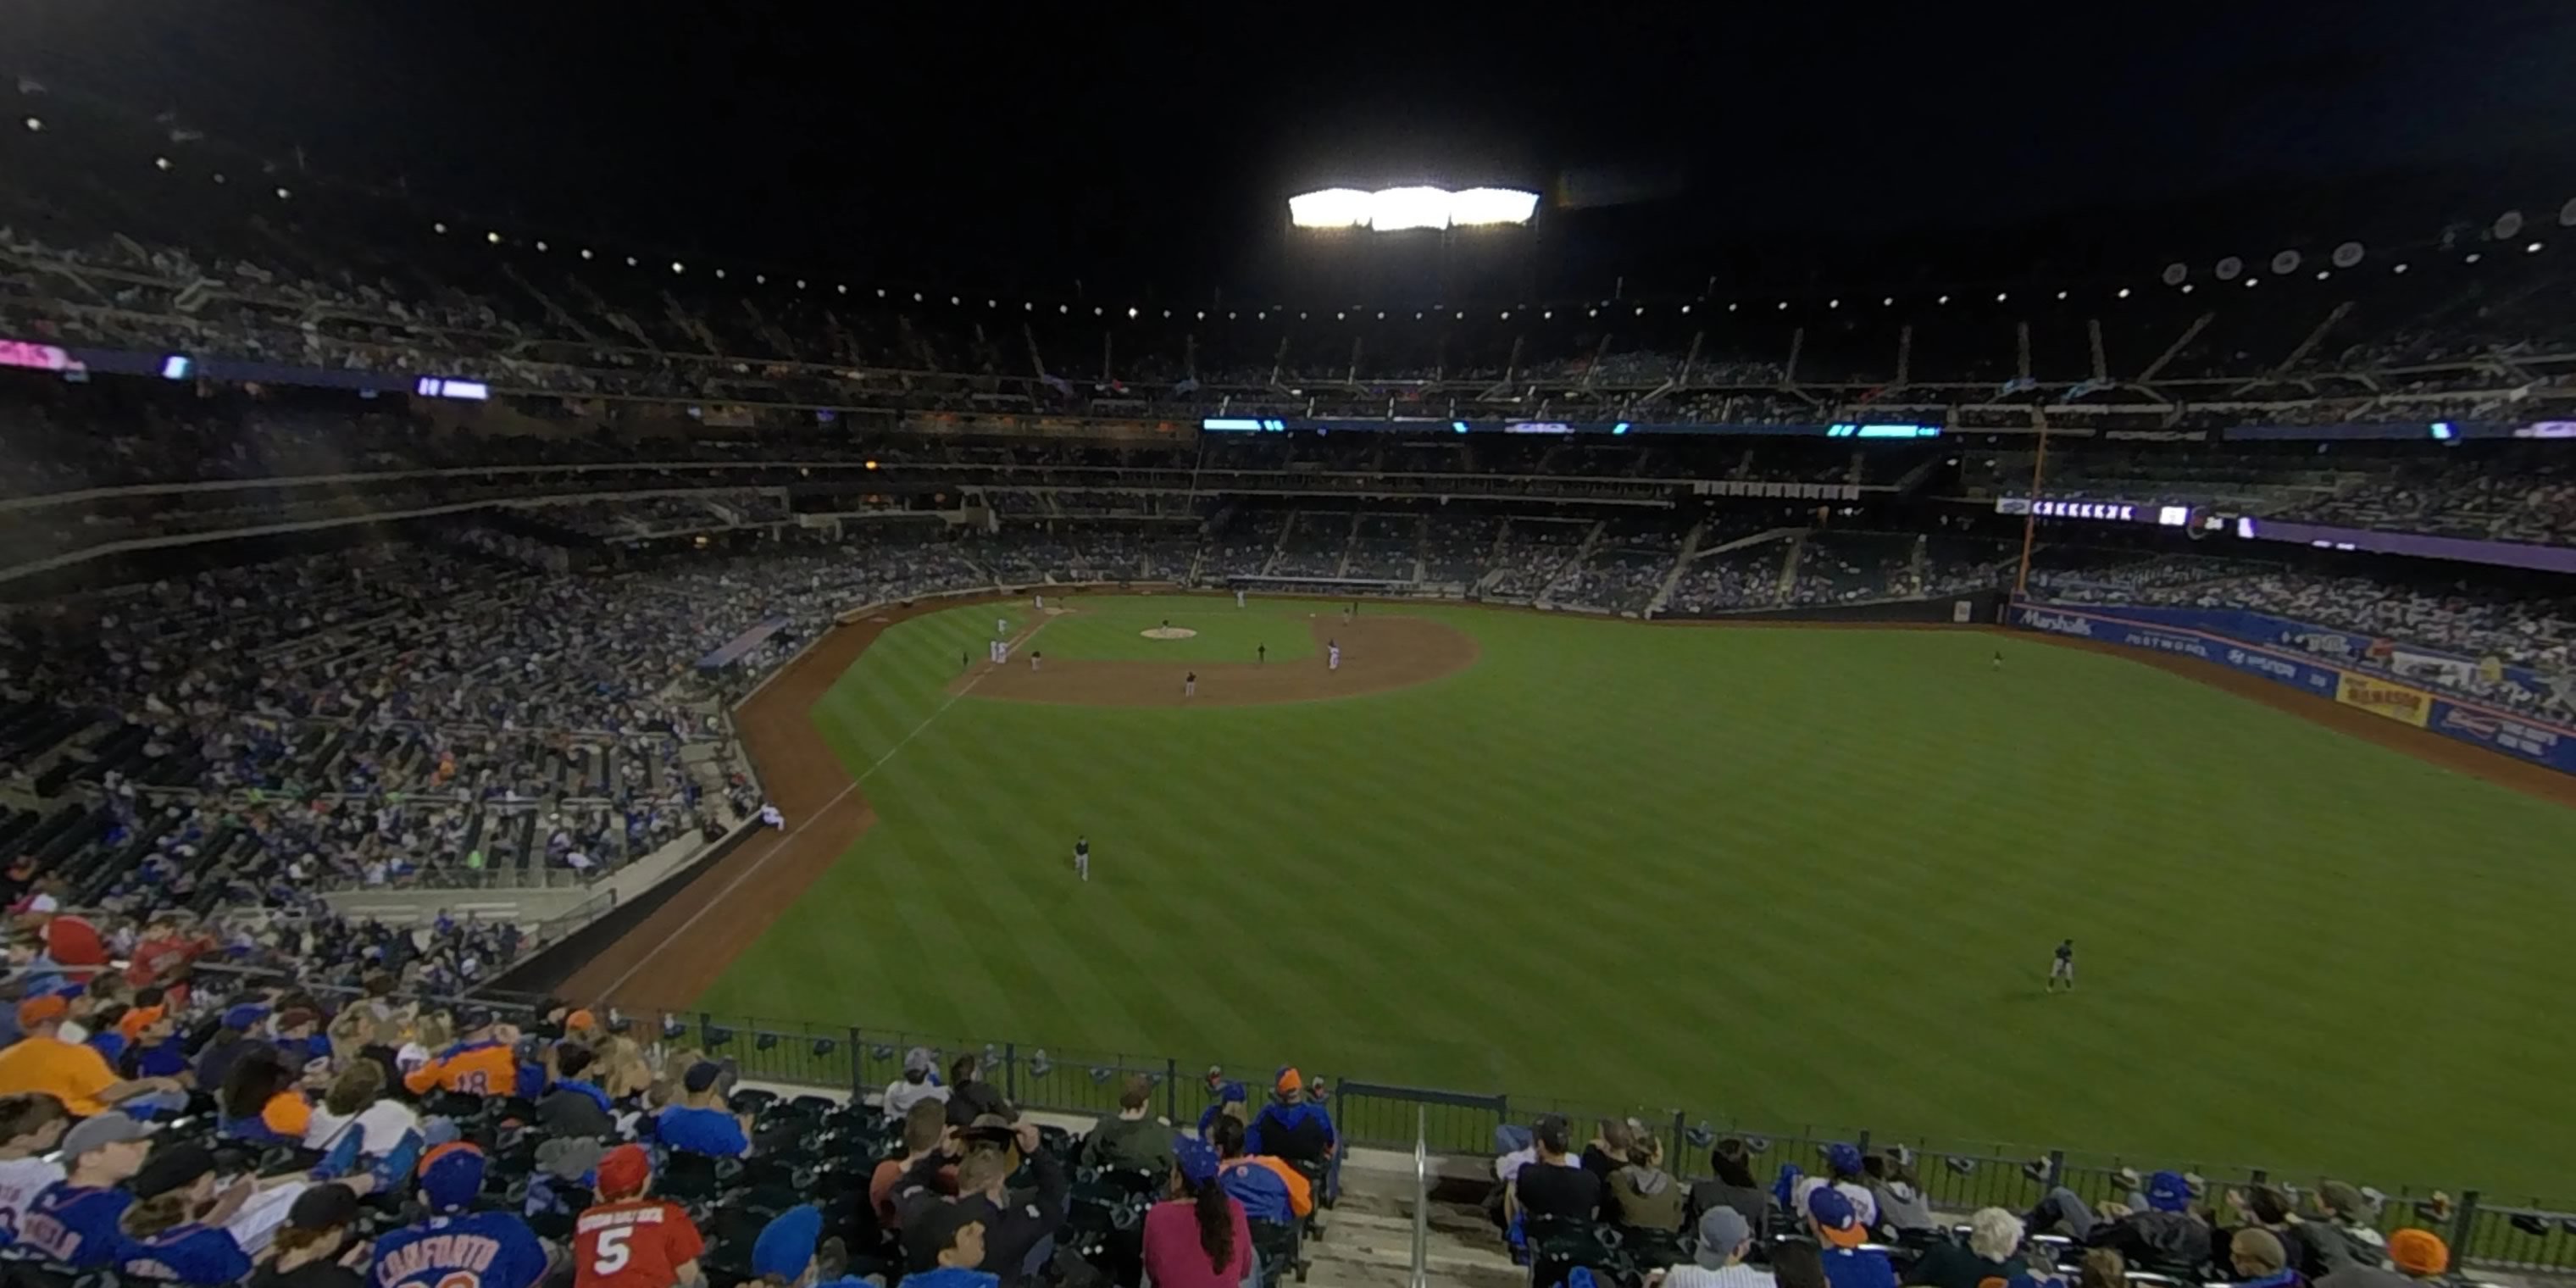 section 301 panoramic seat view  - citi field